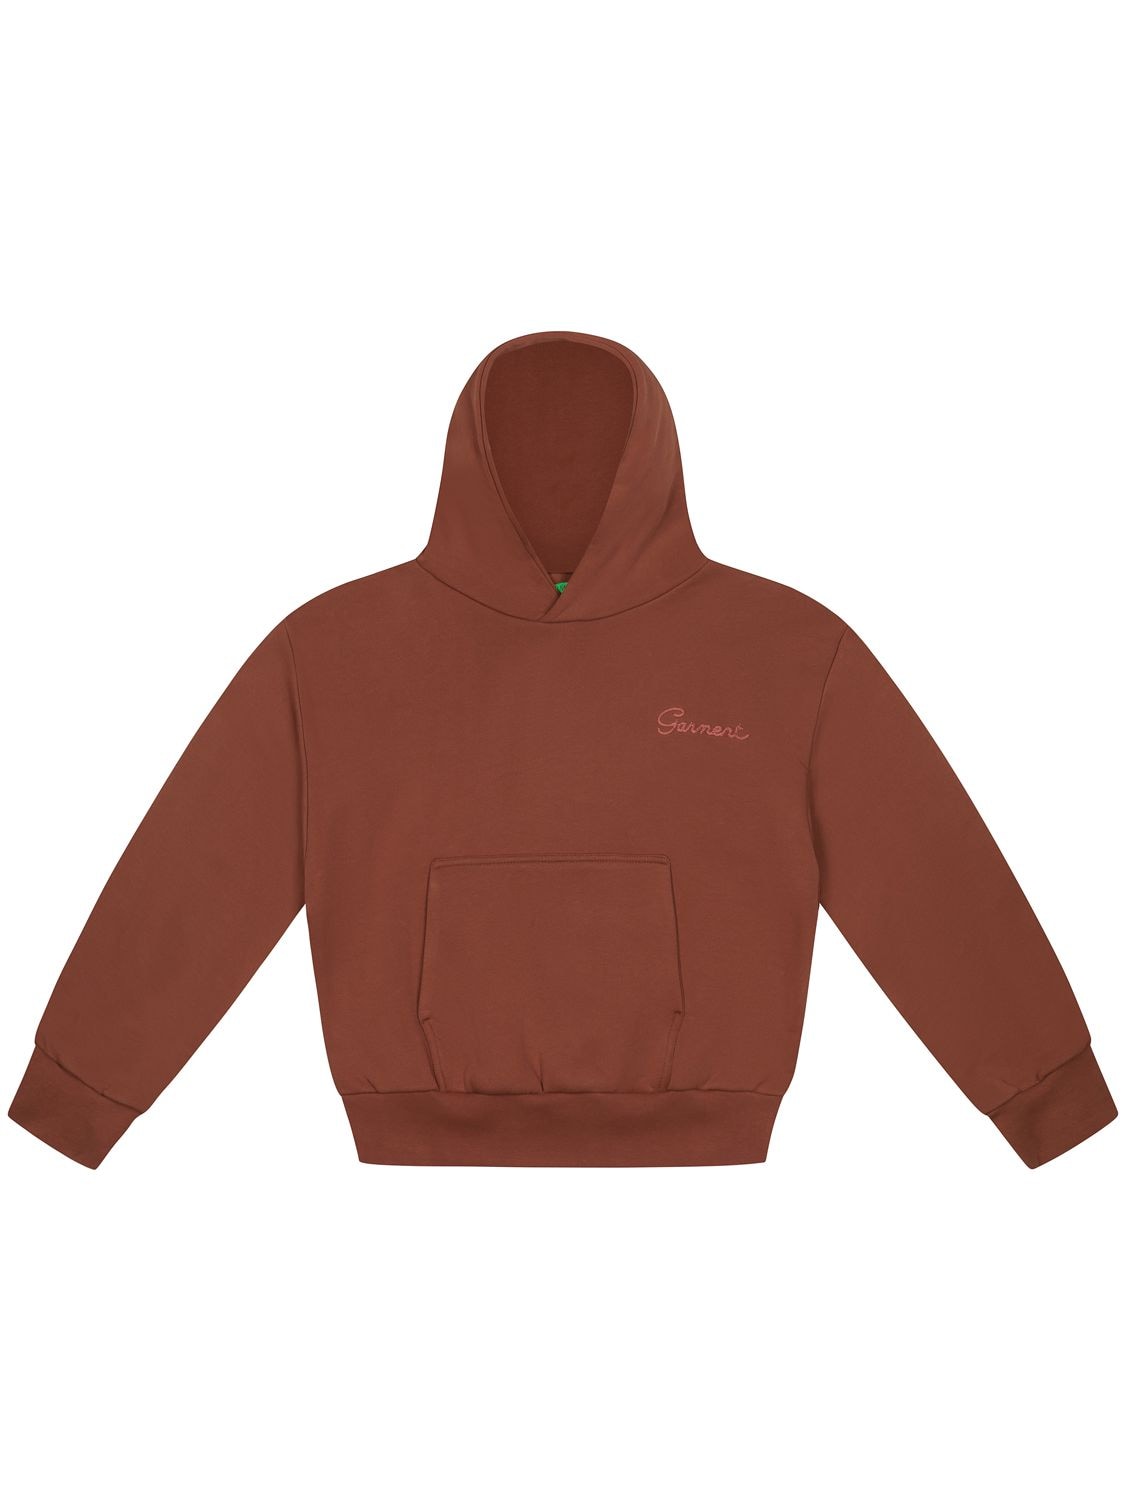 Garment Workshop Double Layer Hoodie W/ Double Embroidery In Mocha Brown